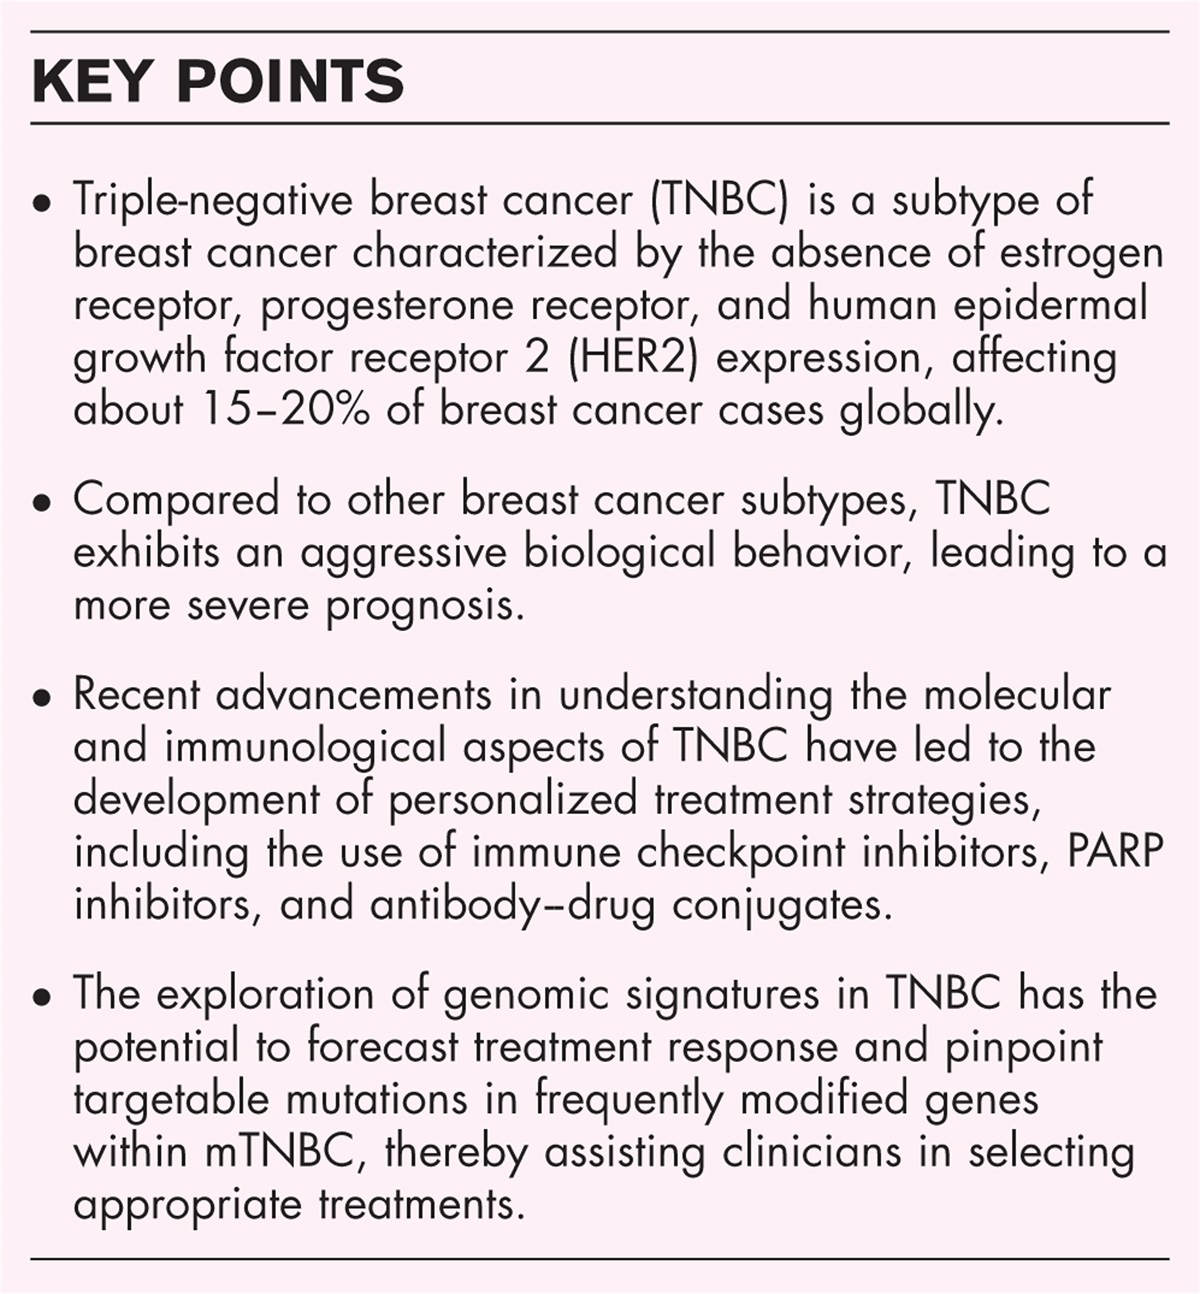 Clinical utility of genomic signatures for the management of early and metastatic triple-negative breast cancer